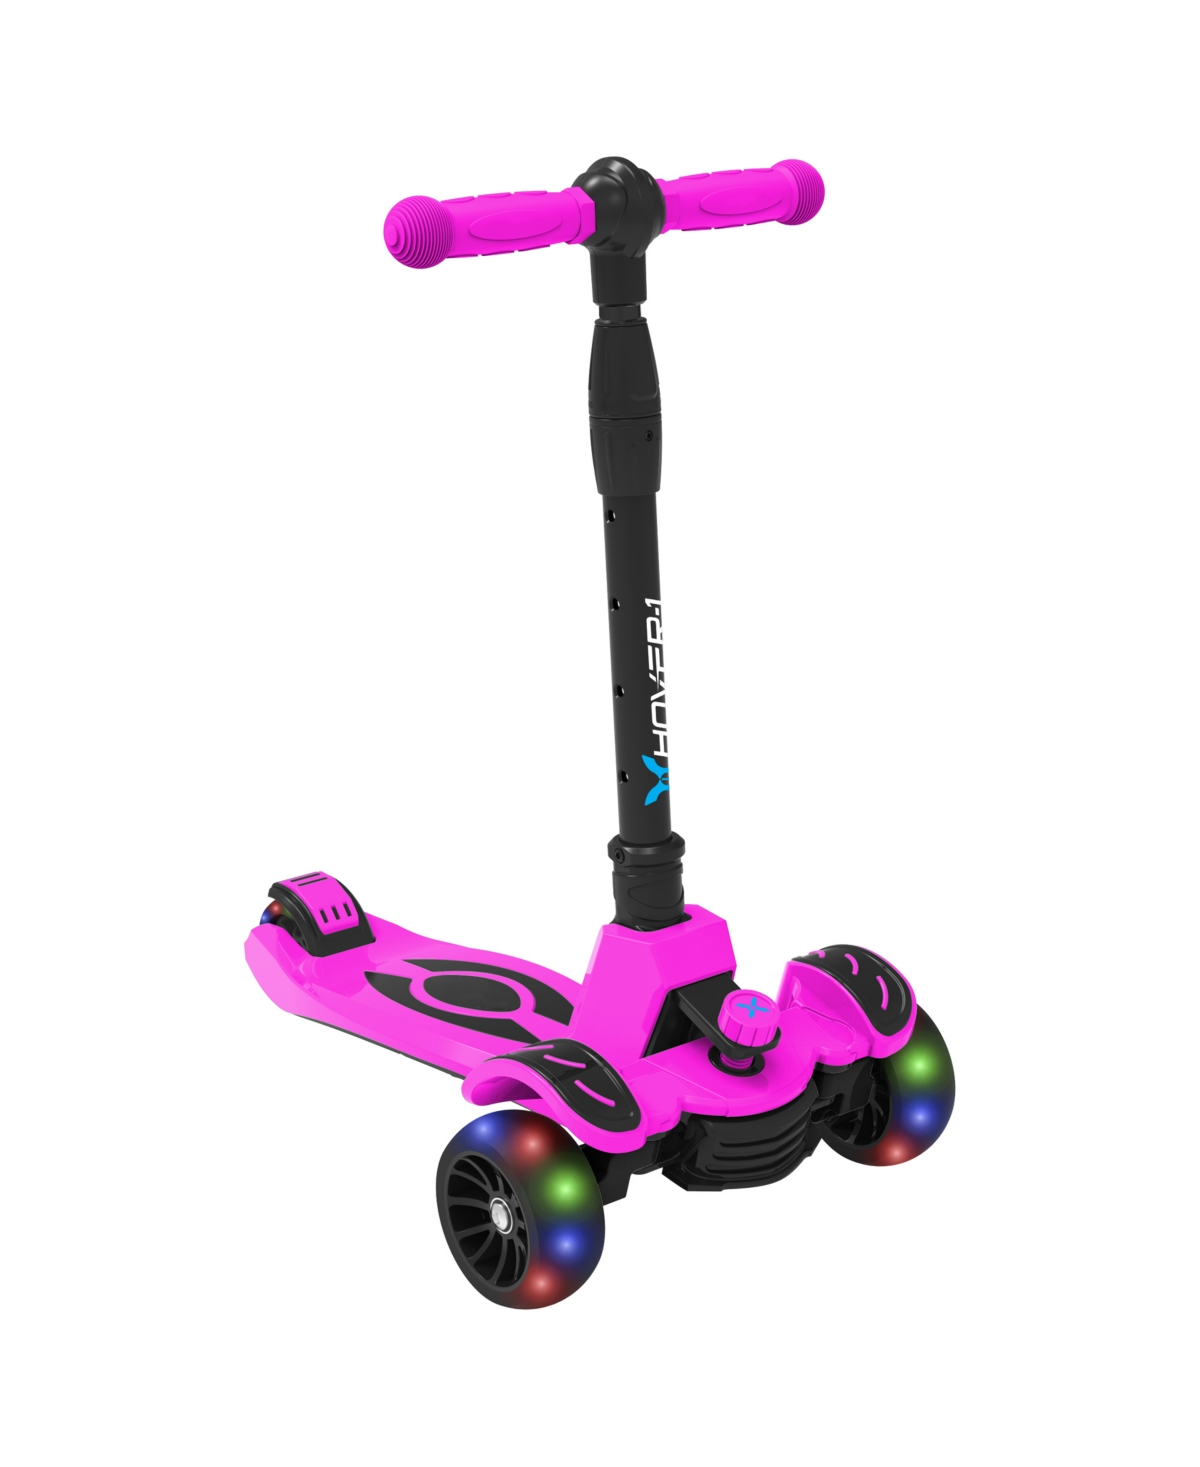 Hover-1 Vivid Folding Kick Scooter For Kids 5 Plus Year Old In Pink